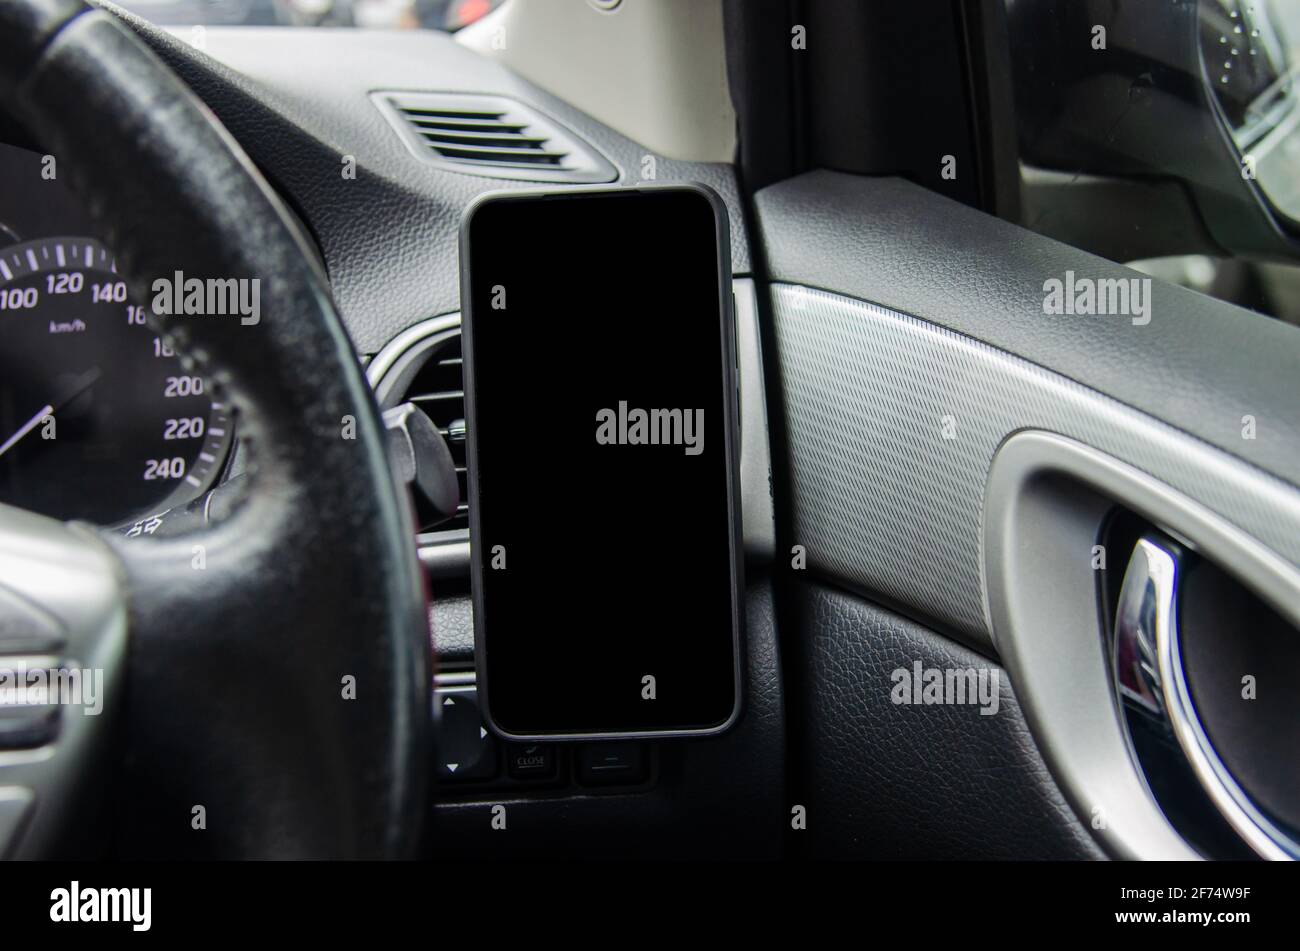 Mobile phone on the car air vent.Blank with white screen.Mock up smart phone in car. Stock Photo